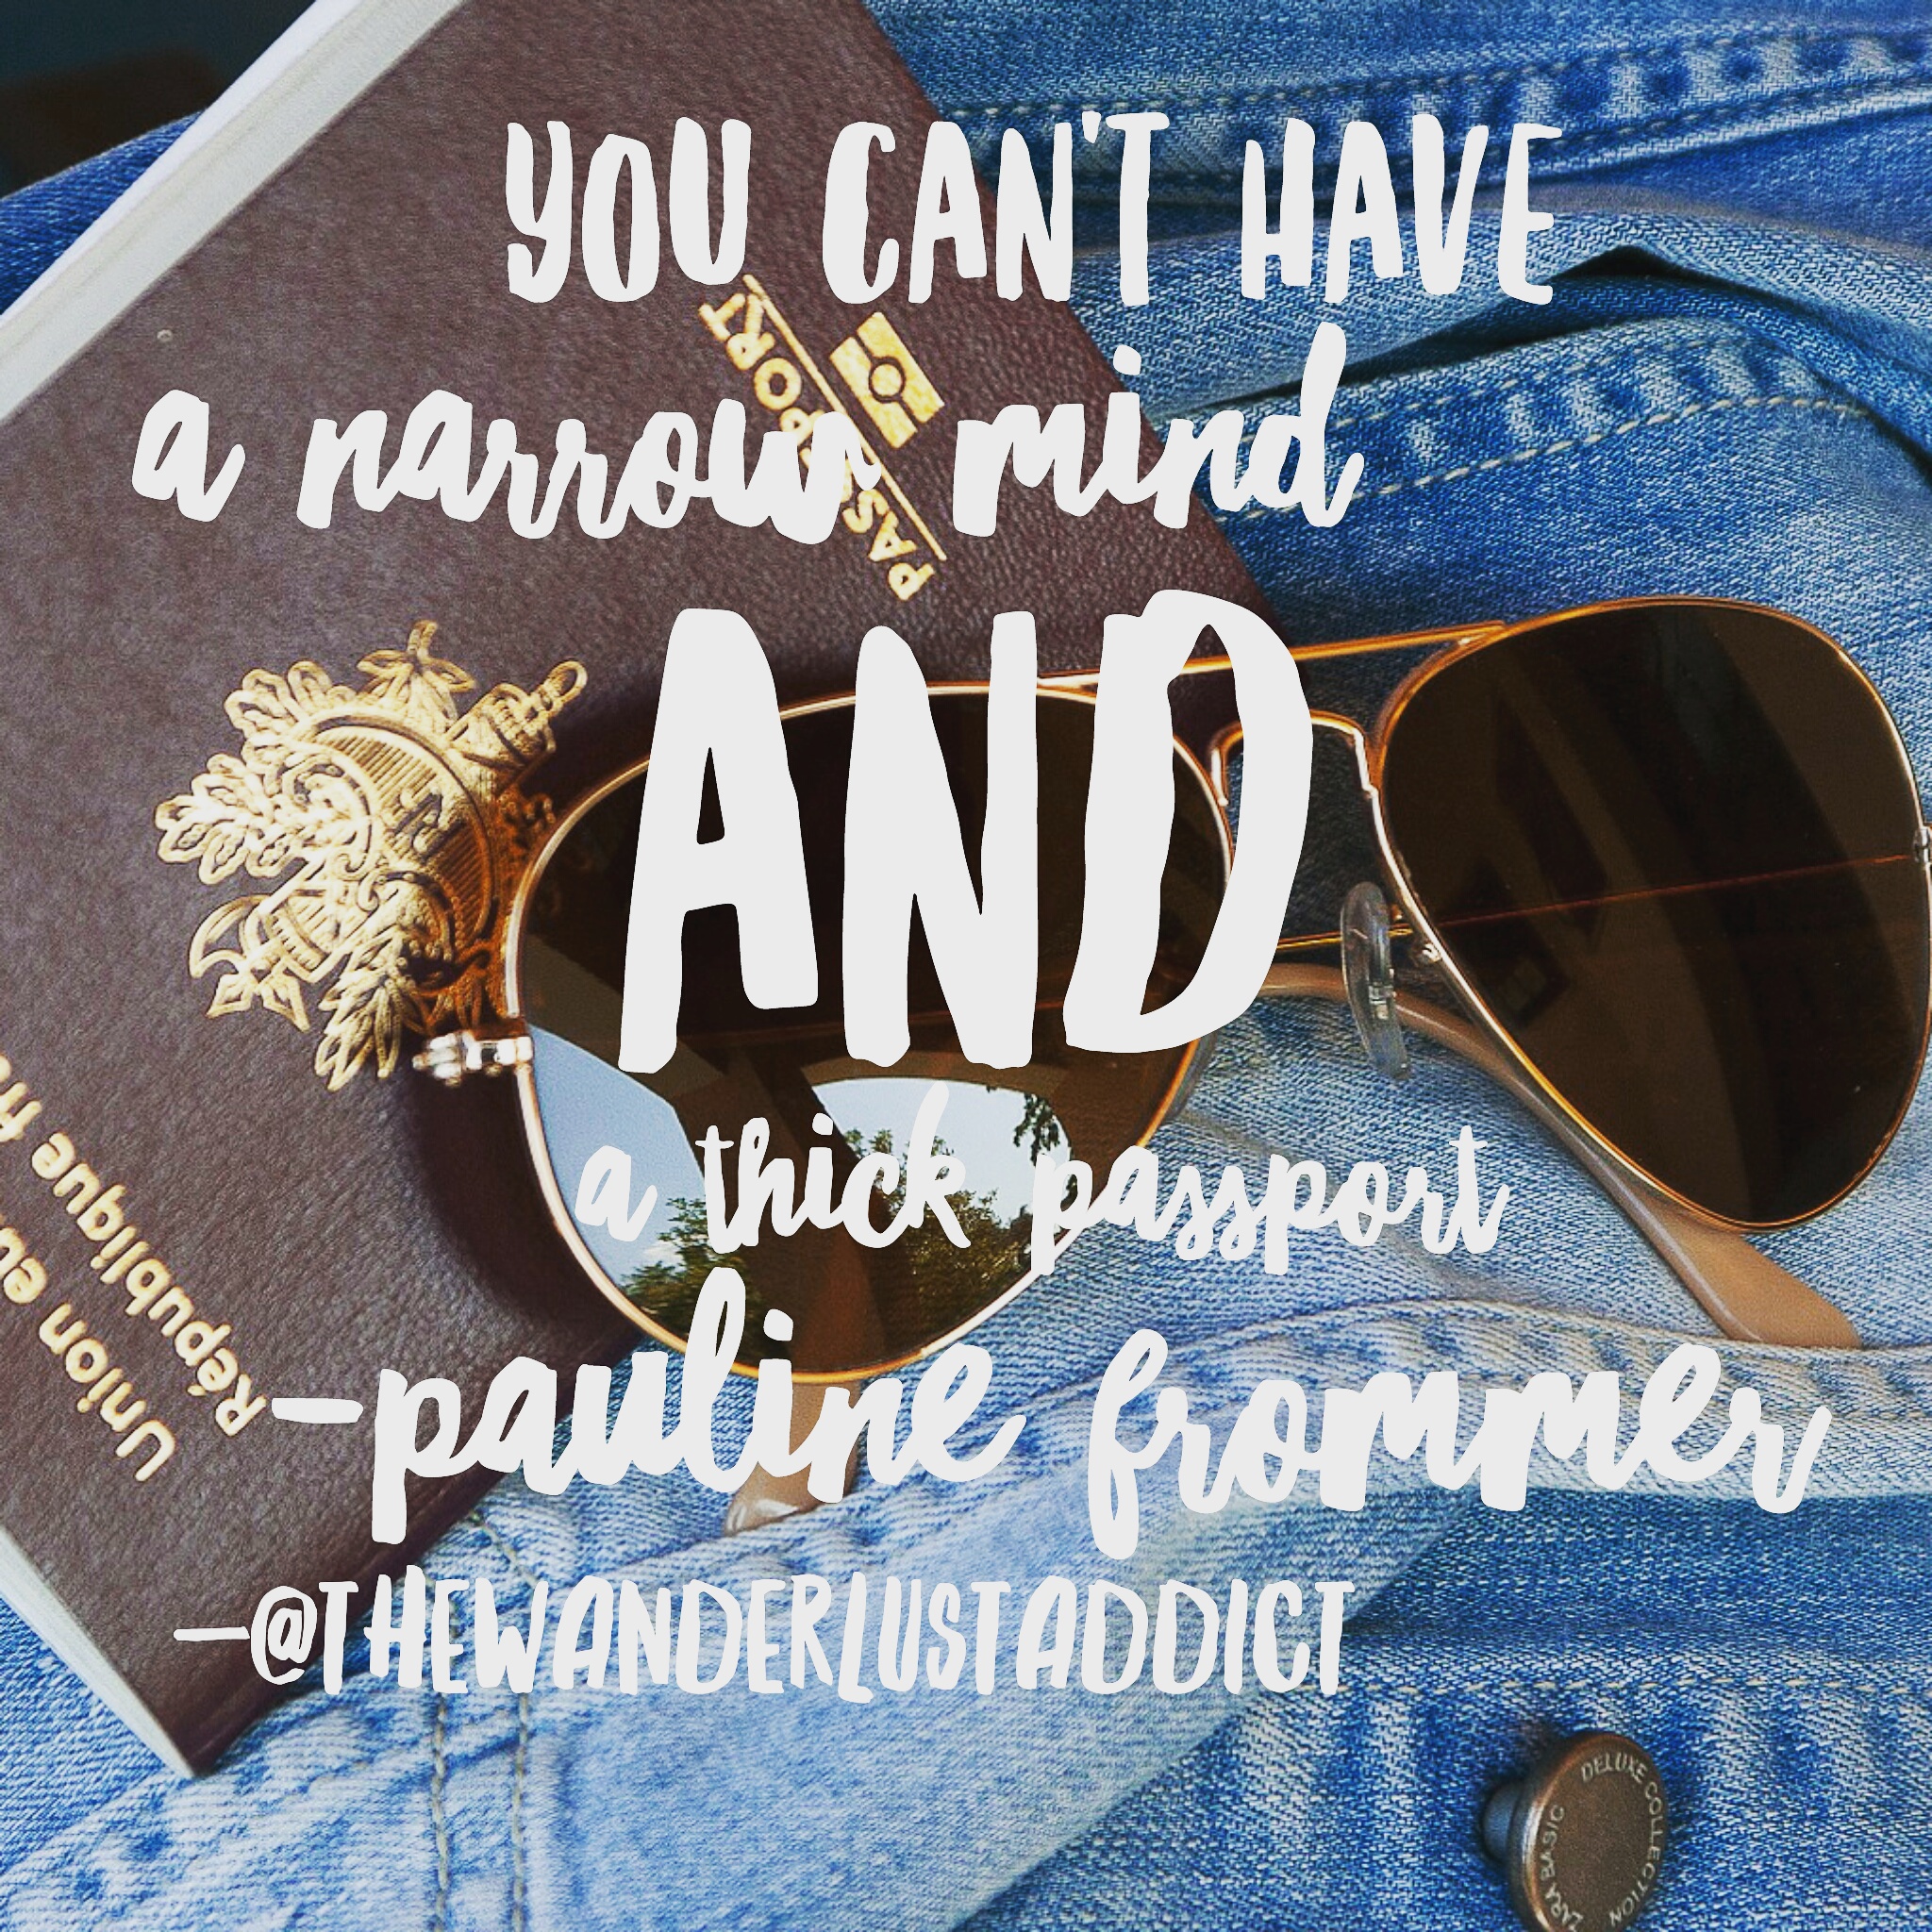 You can't have a narrow mind and a thick passport